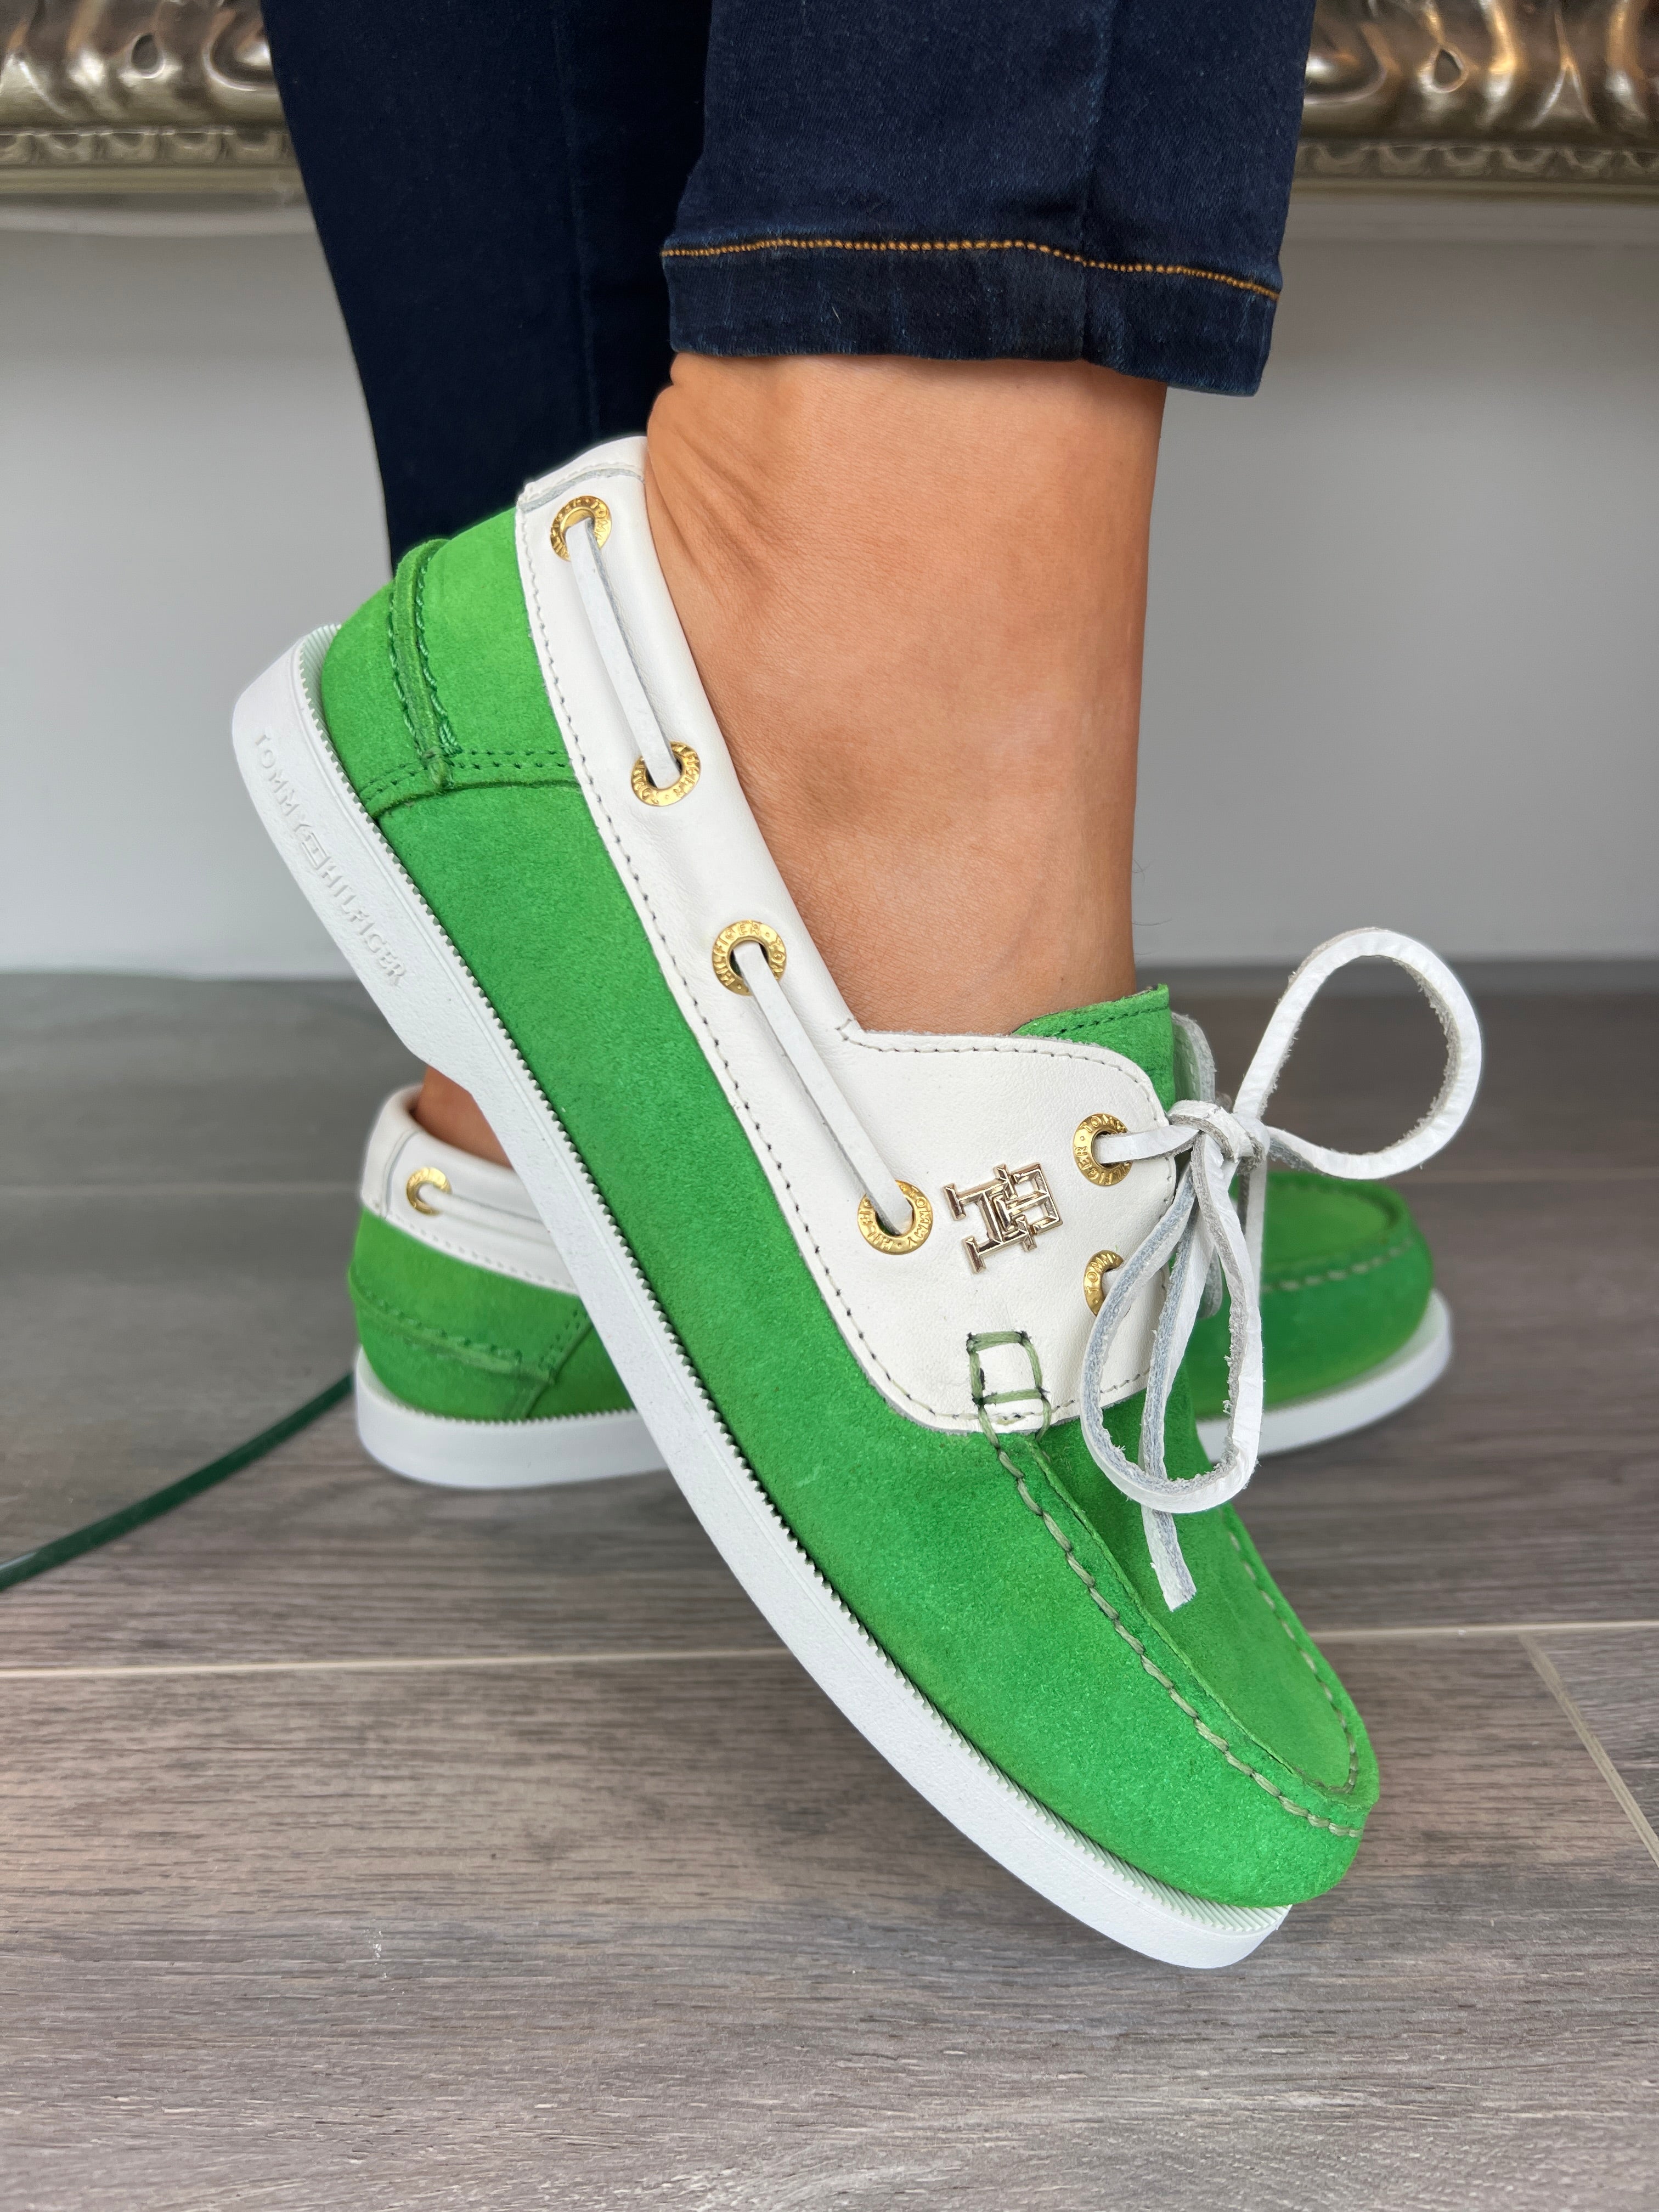 Tommy Hilfiger 7066 - TH Boat Shoe - Spring Lime – Fred Funk